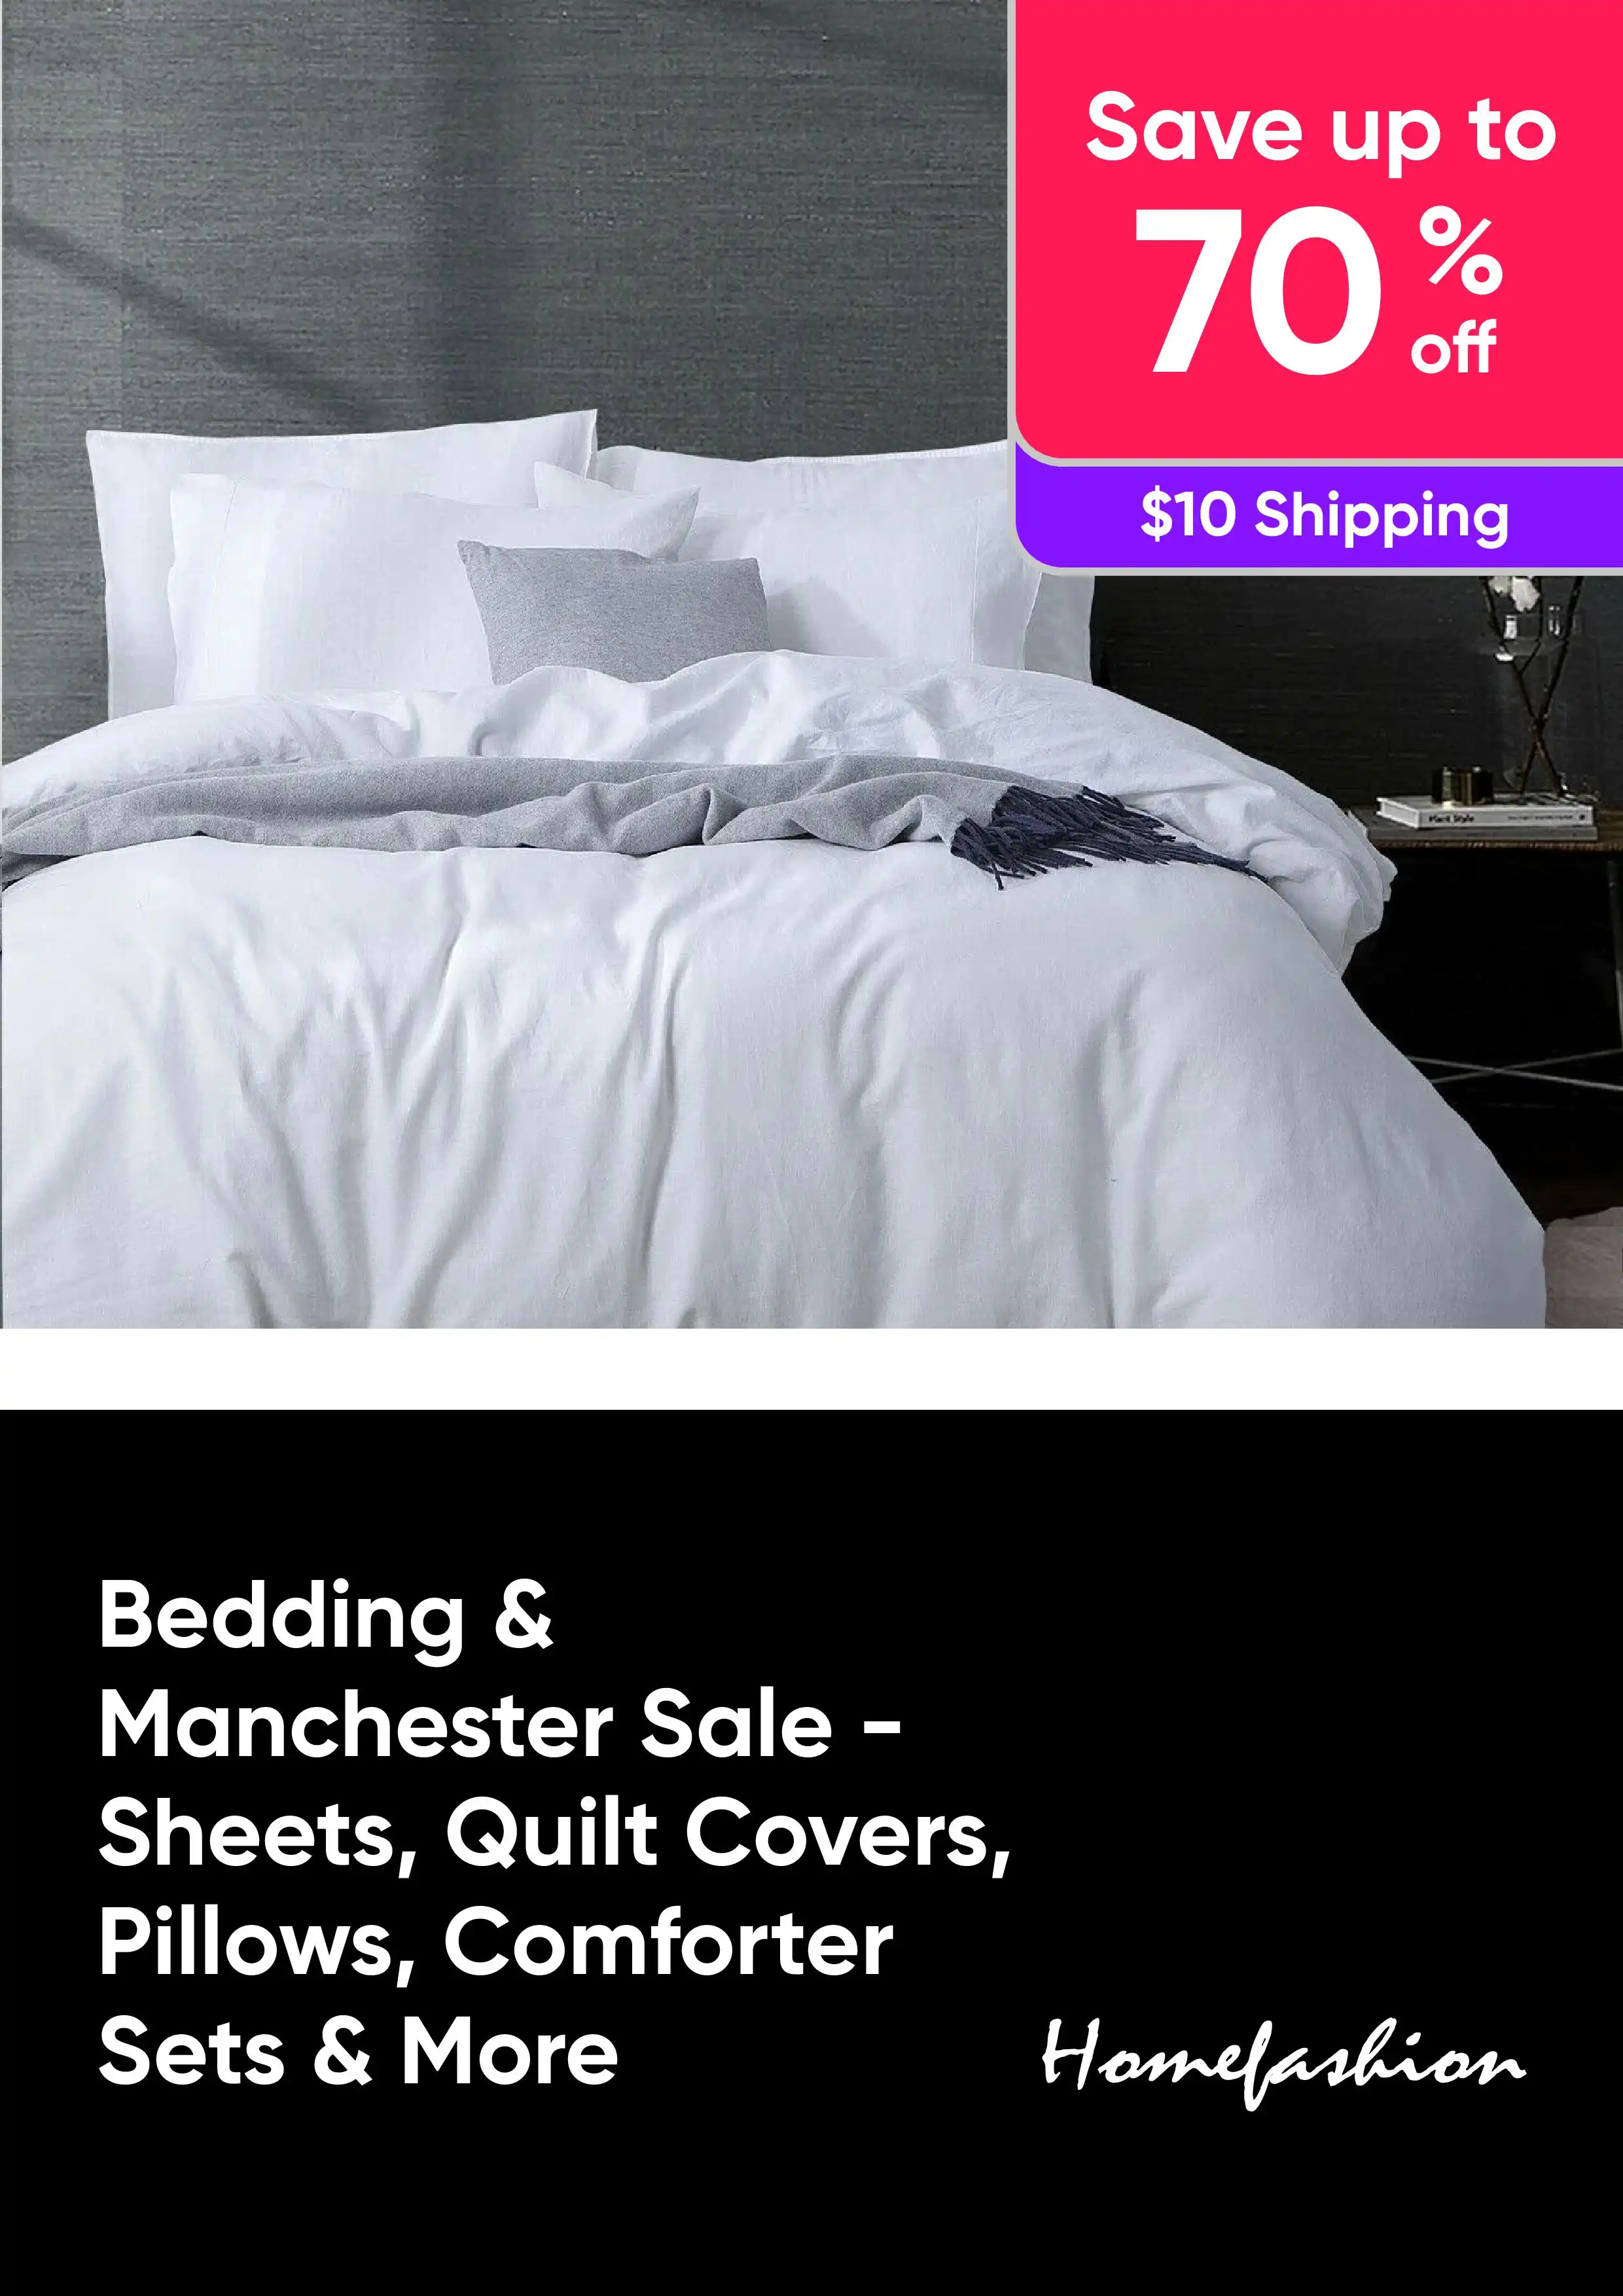 Up to 70% off Bedding and Manchester - Shop Sheets, Quilt Covers, Pillows, Comforter Sets and More